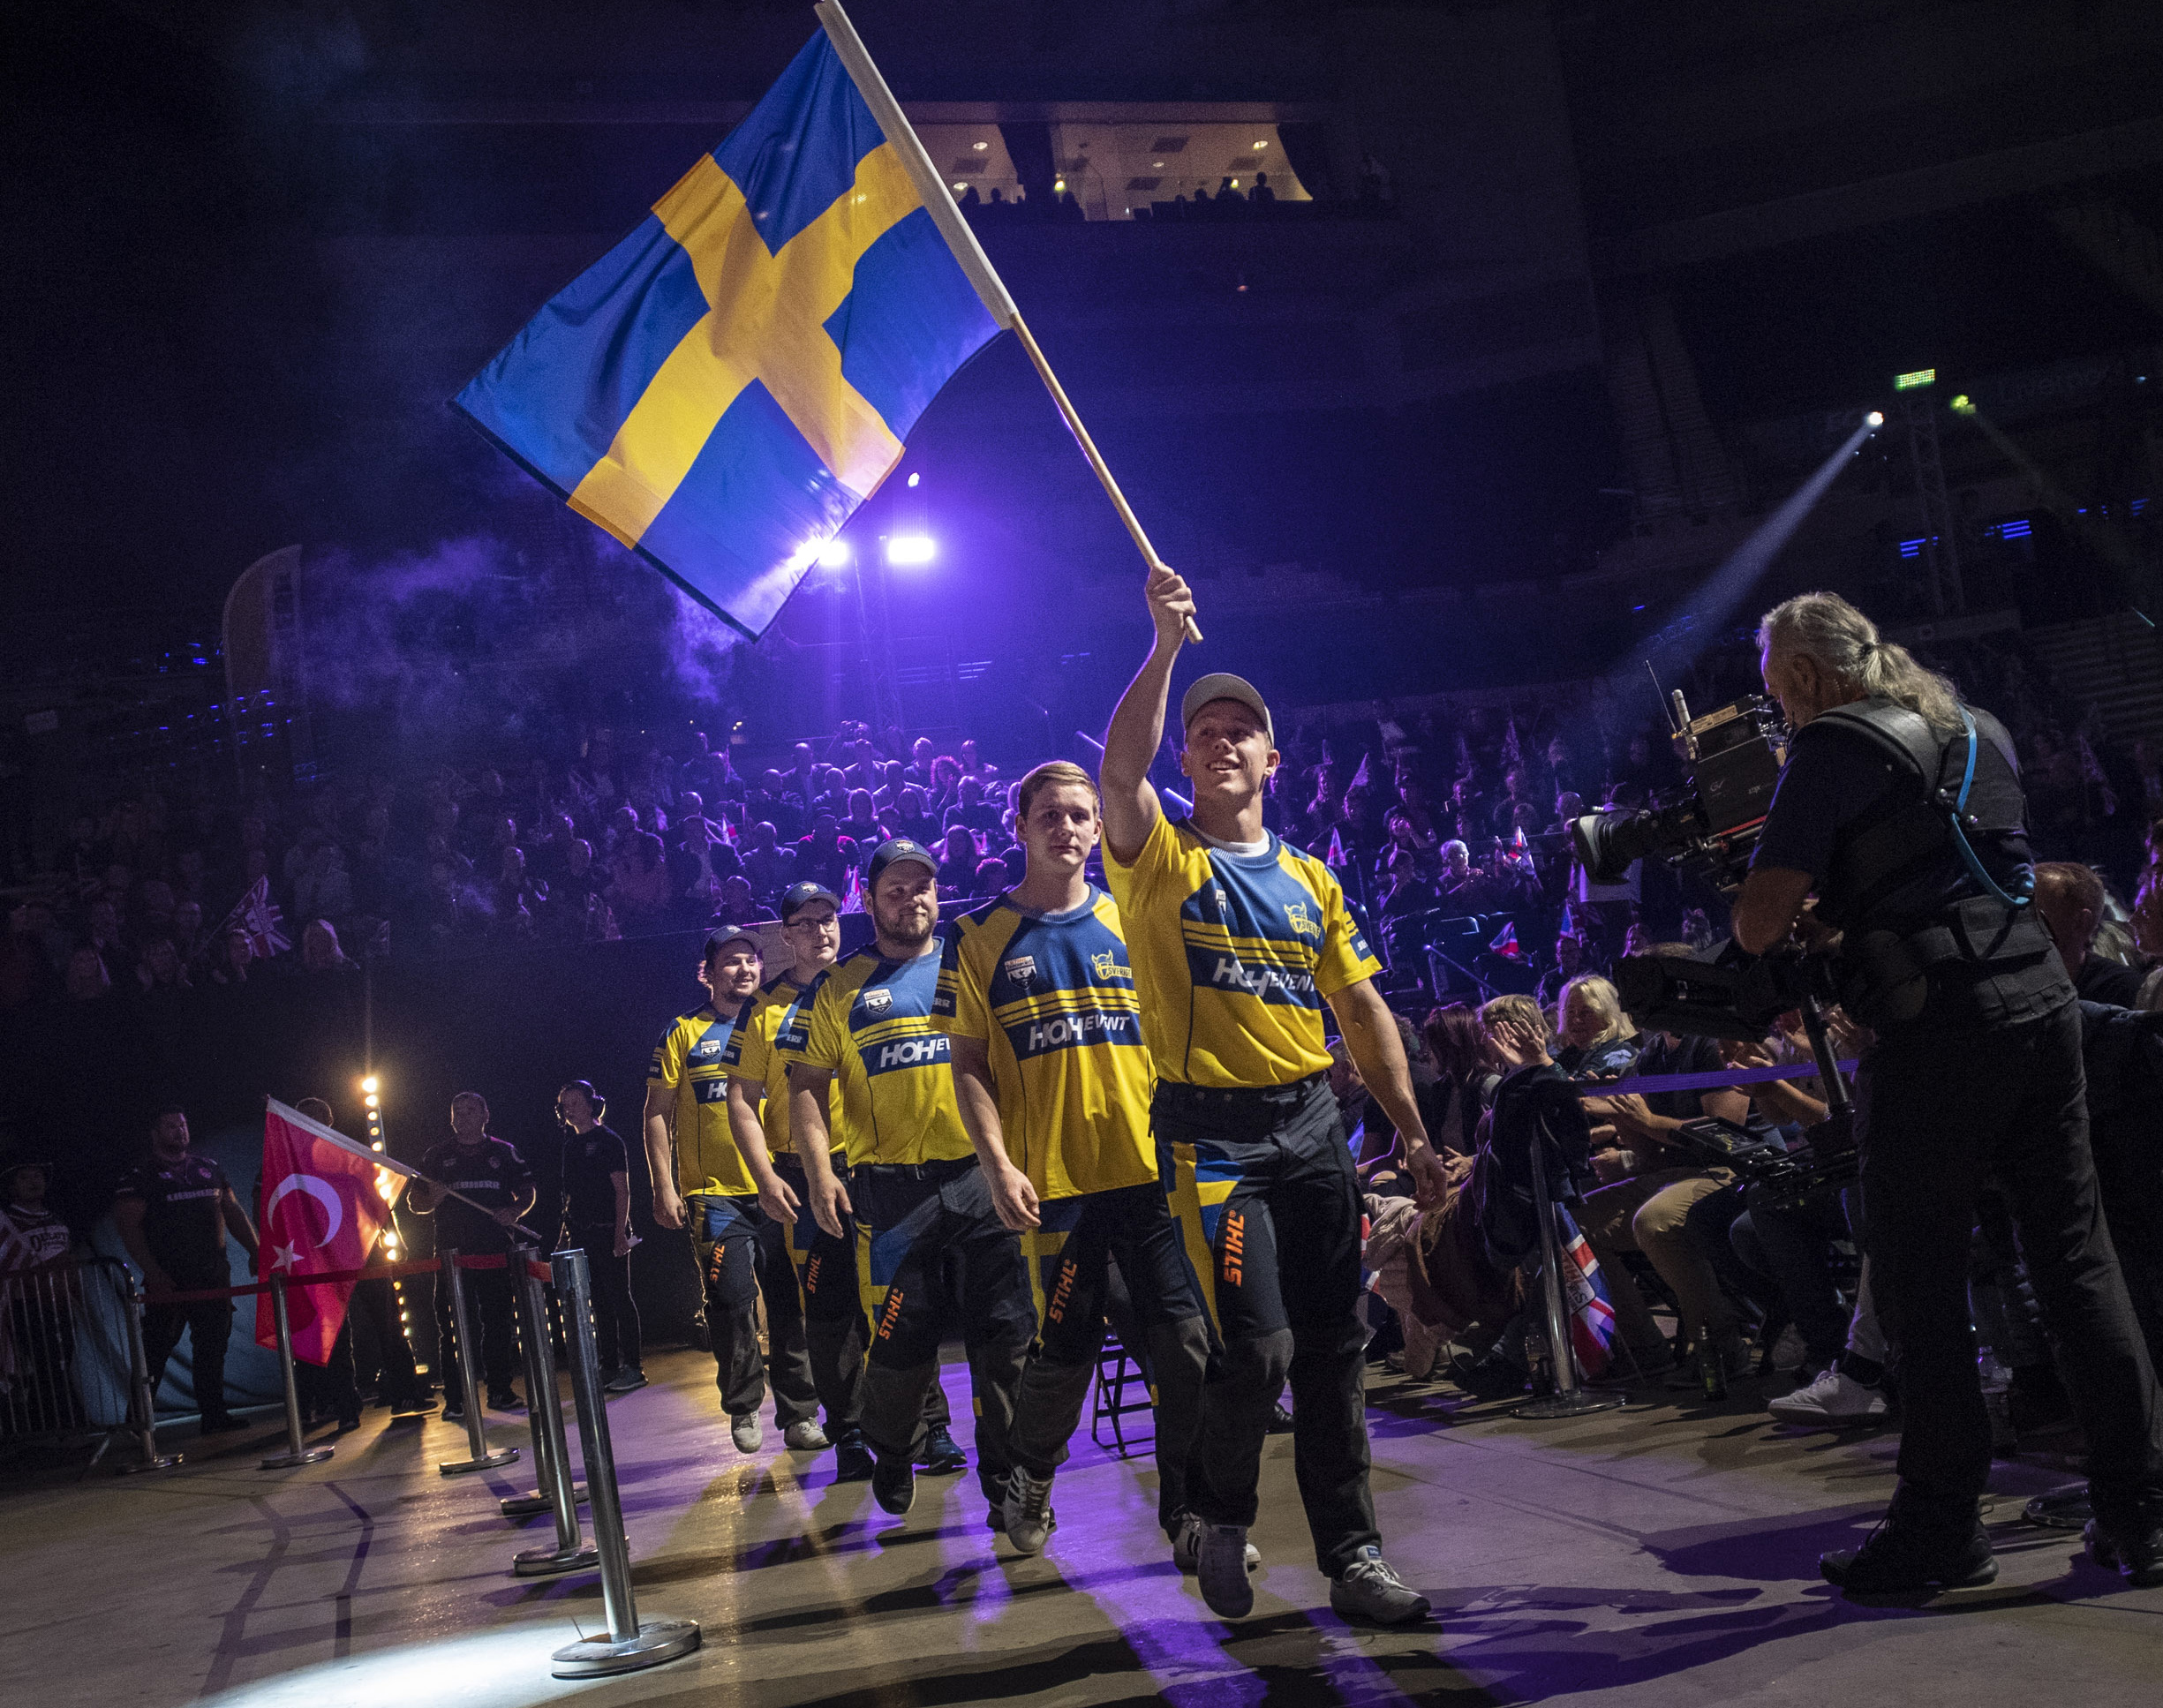 The Swedish national team at Timbersports at the opening of the 2018 Timbersports World Cup. Photo: STIHL Timbersports.